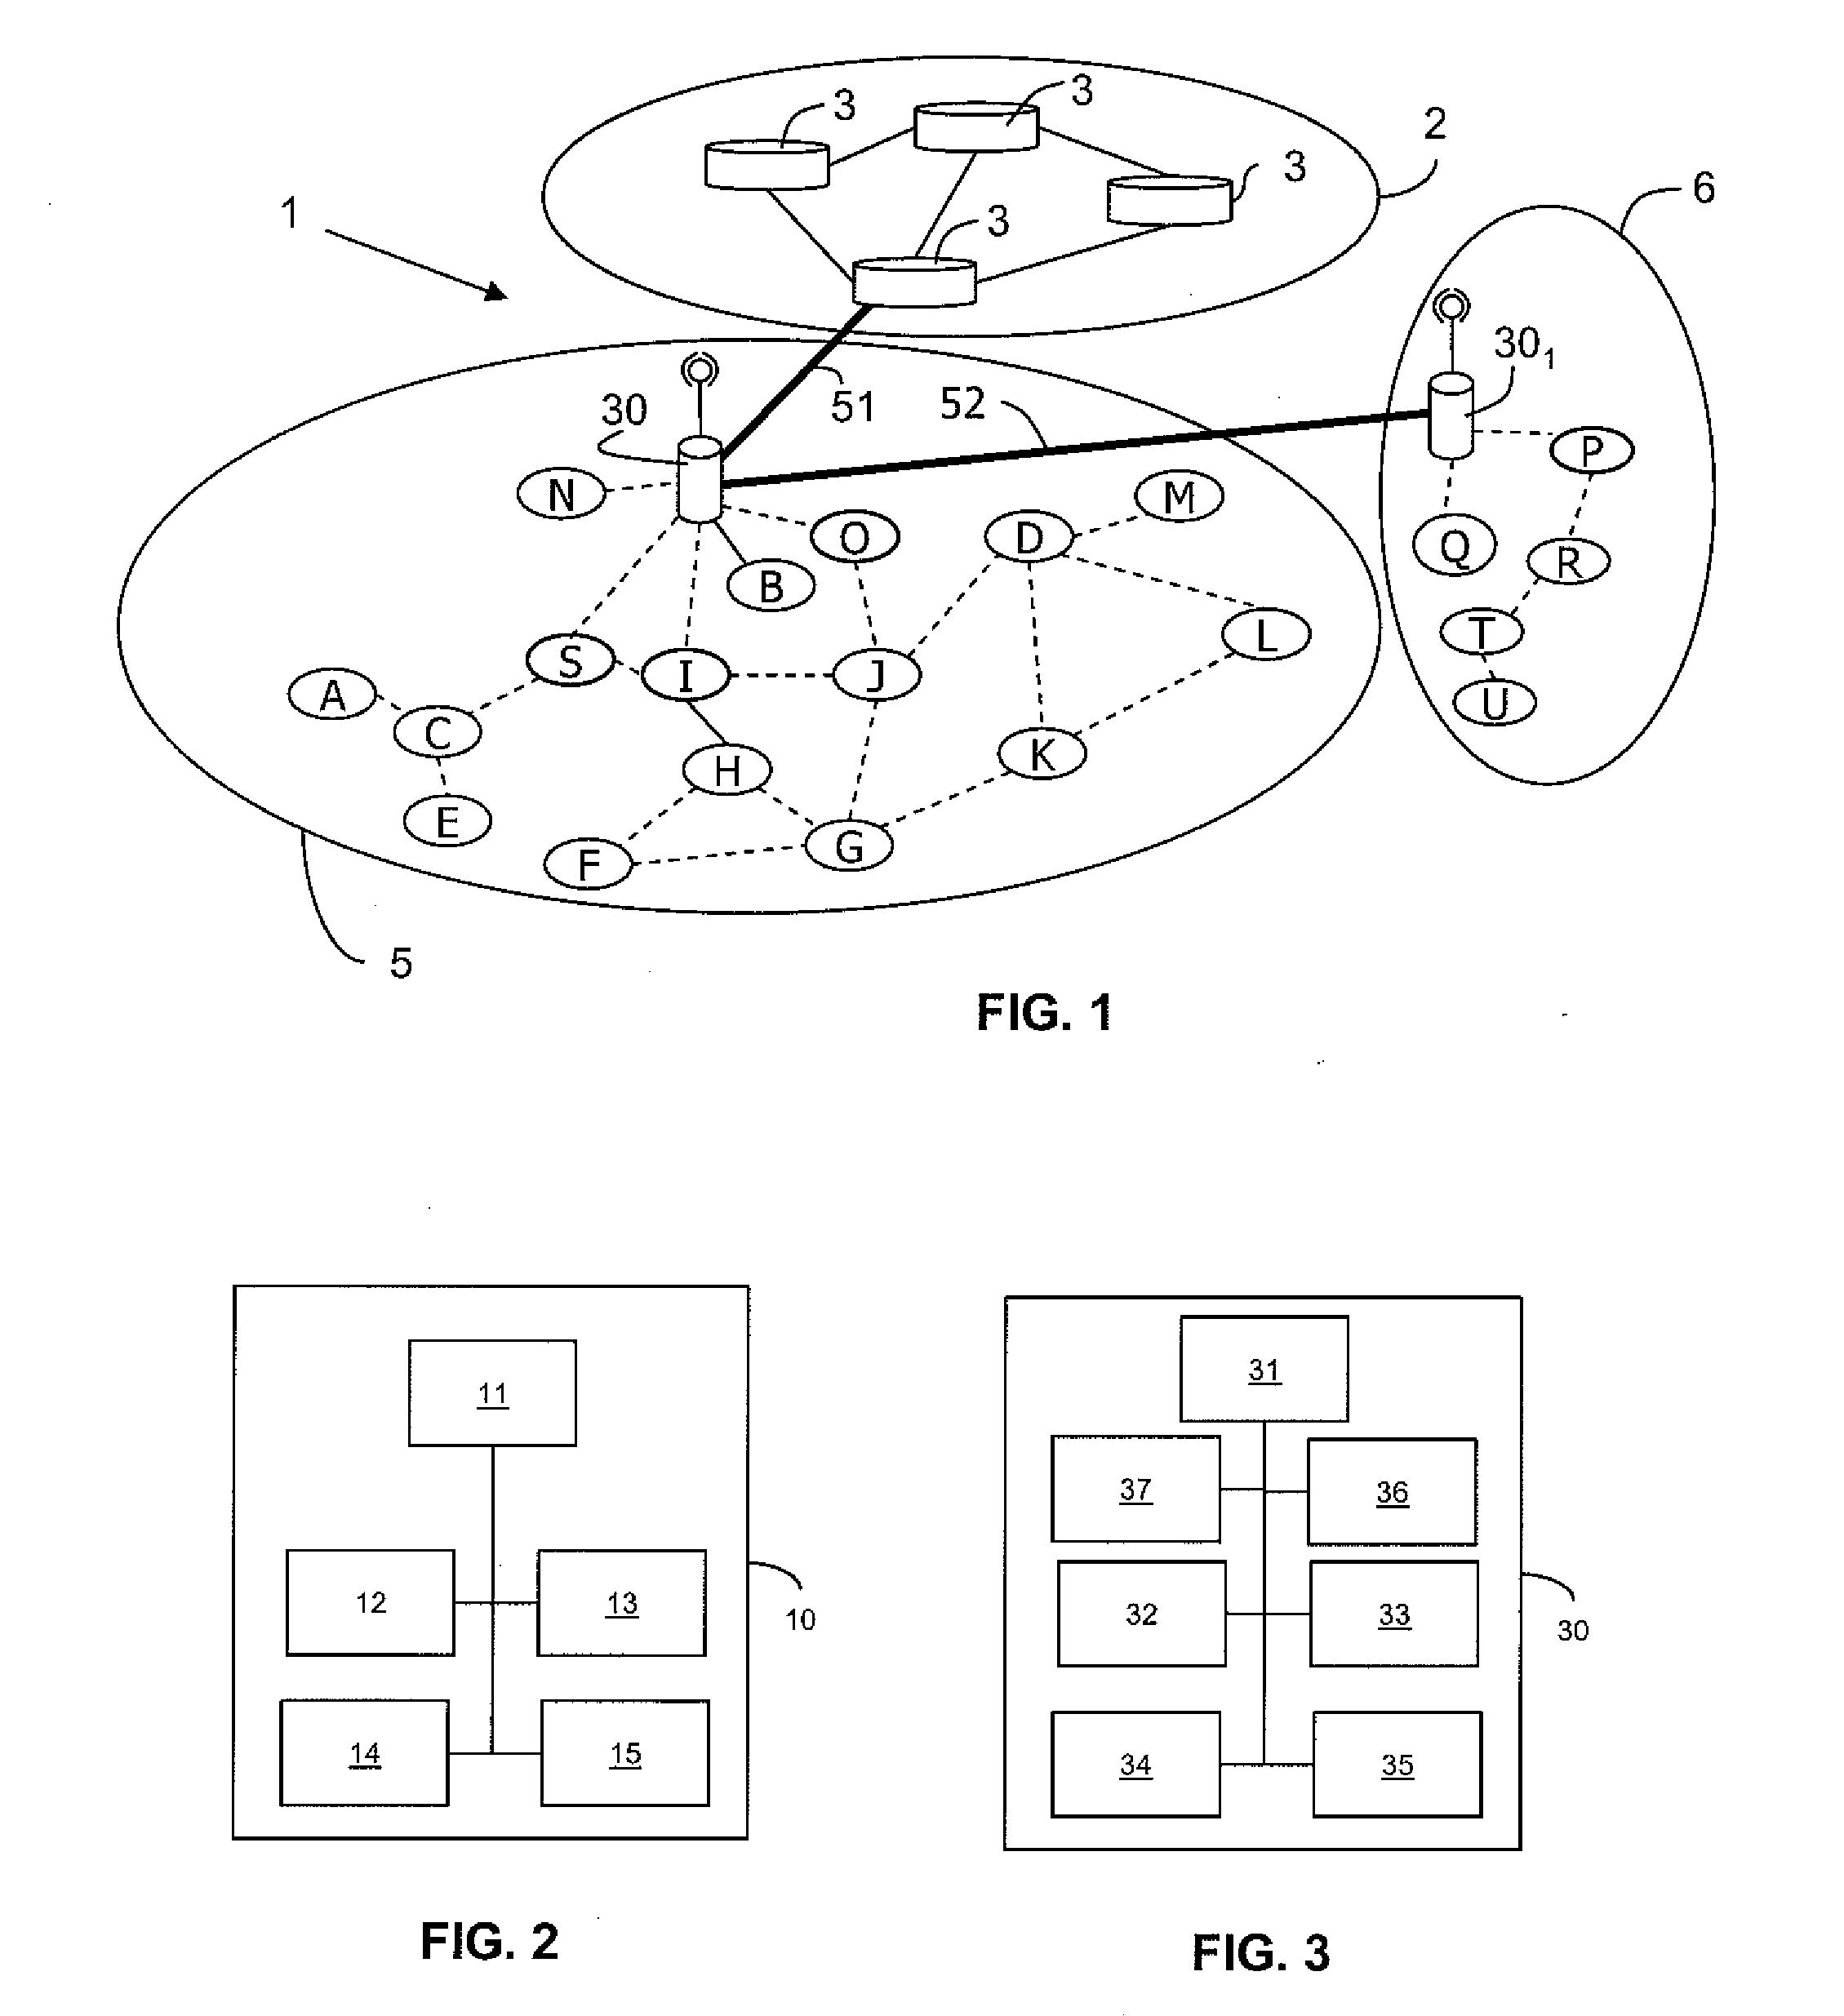 Access Point and Node for Controlling Routing in a Hybrid Network